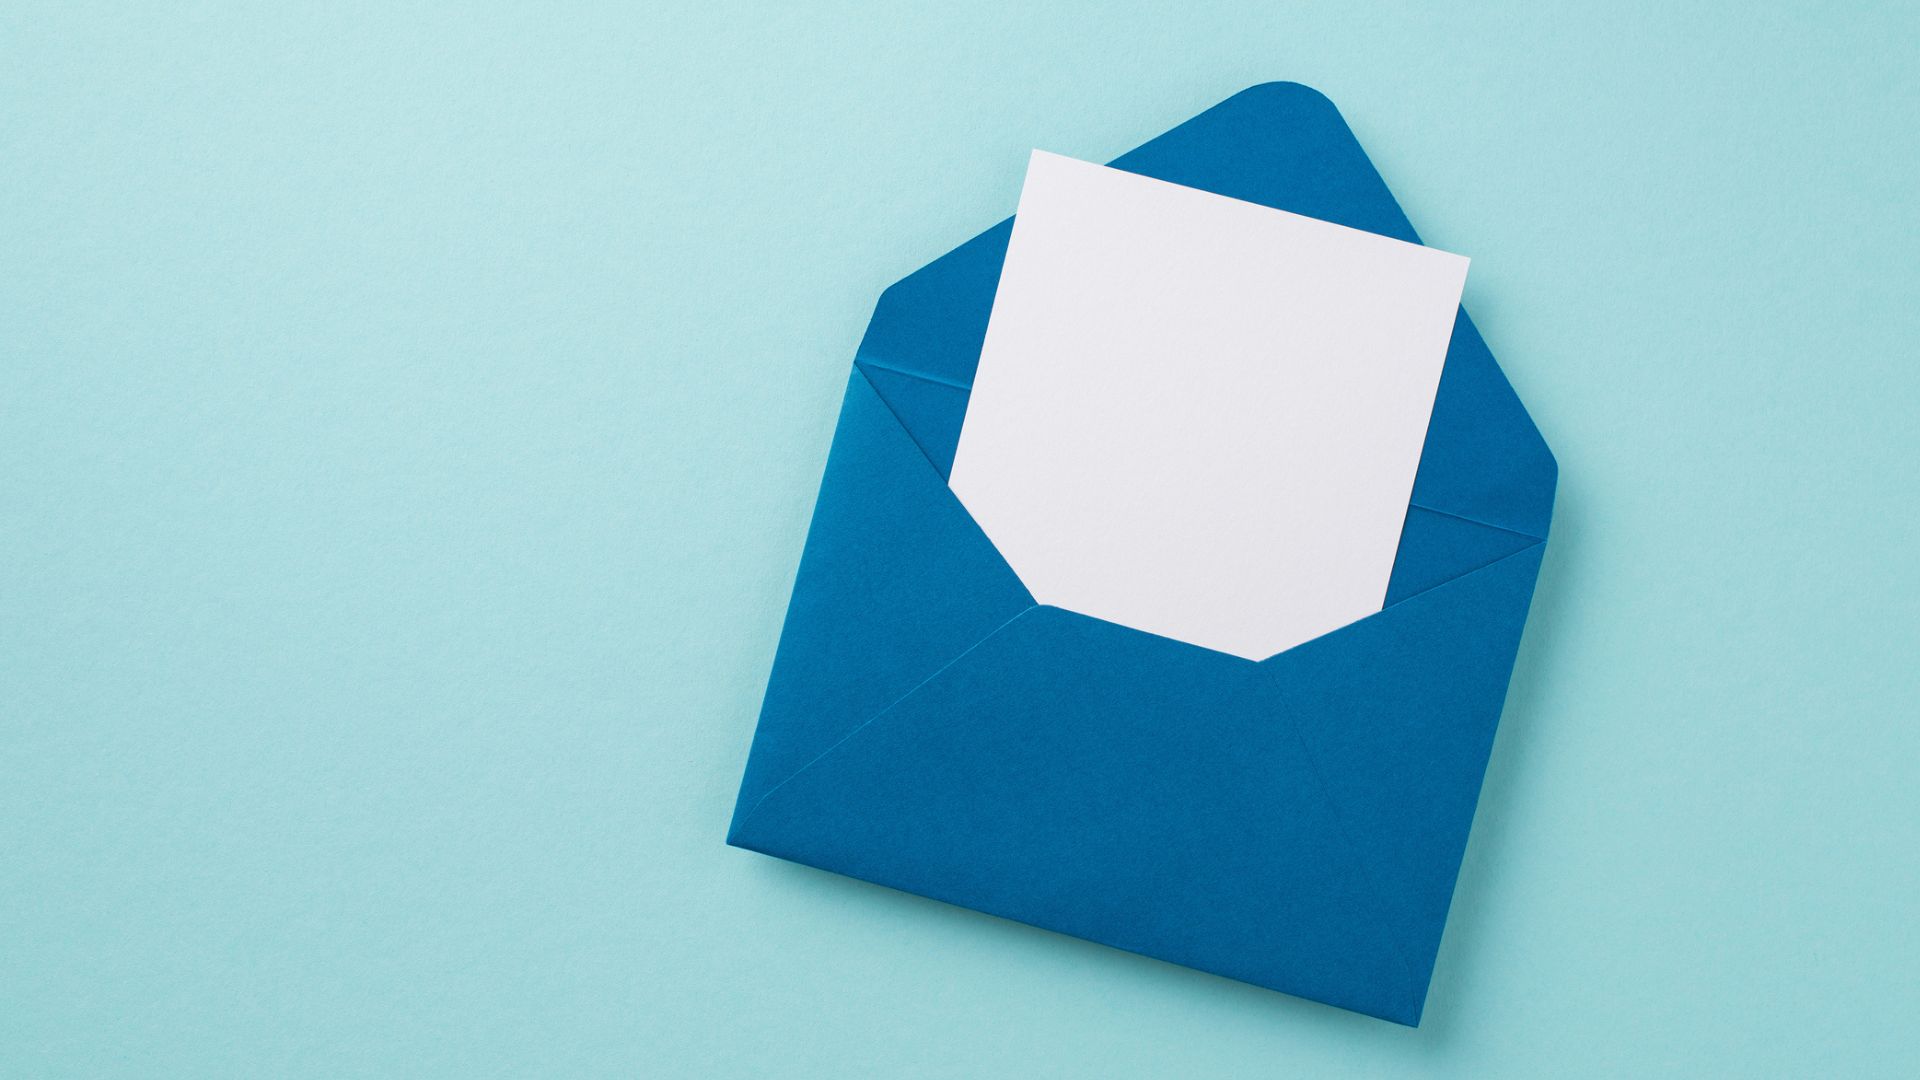 Top view of open blue envelope